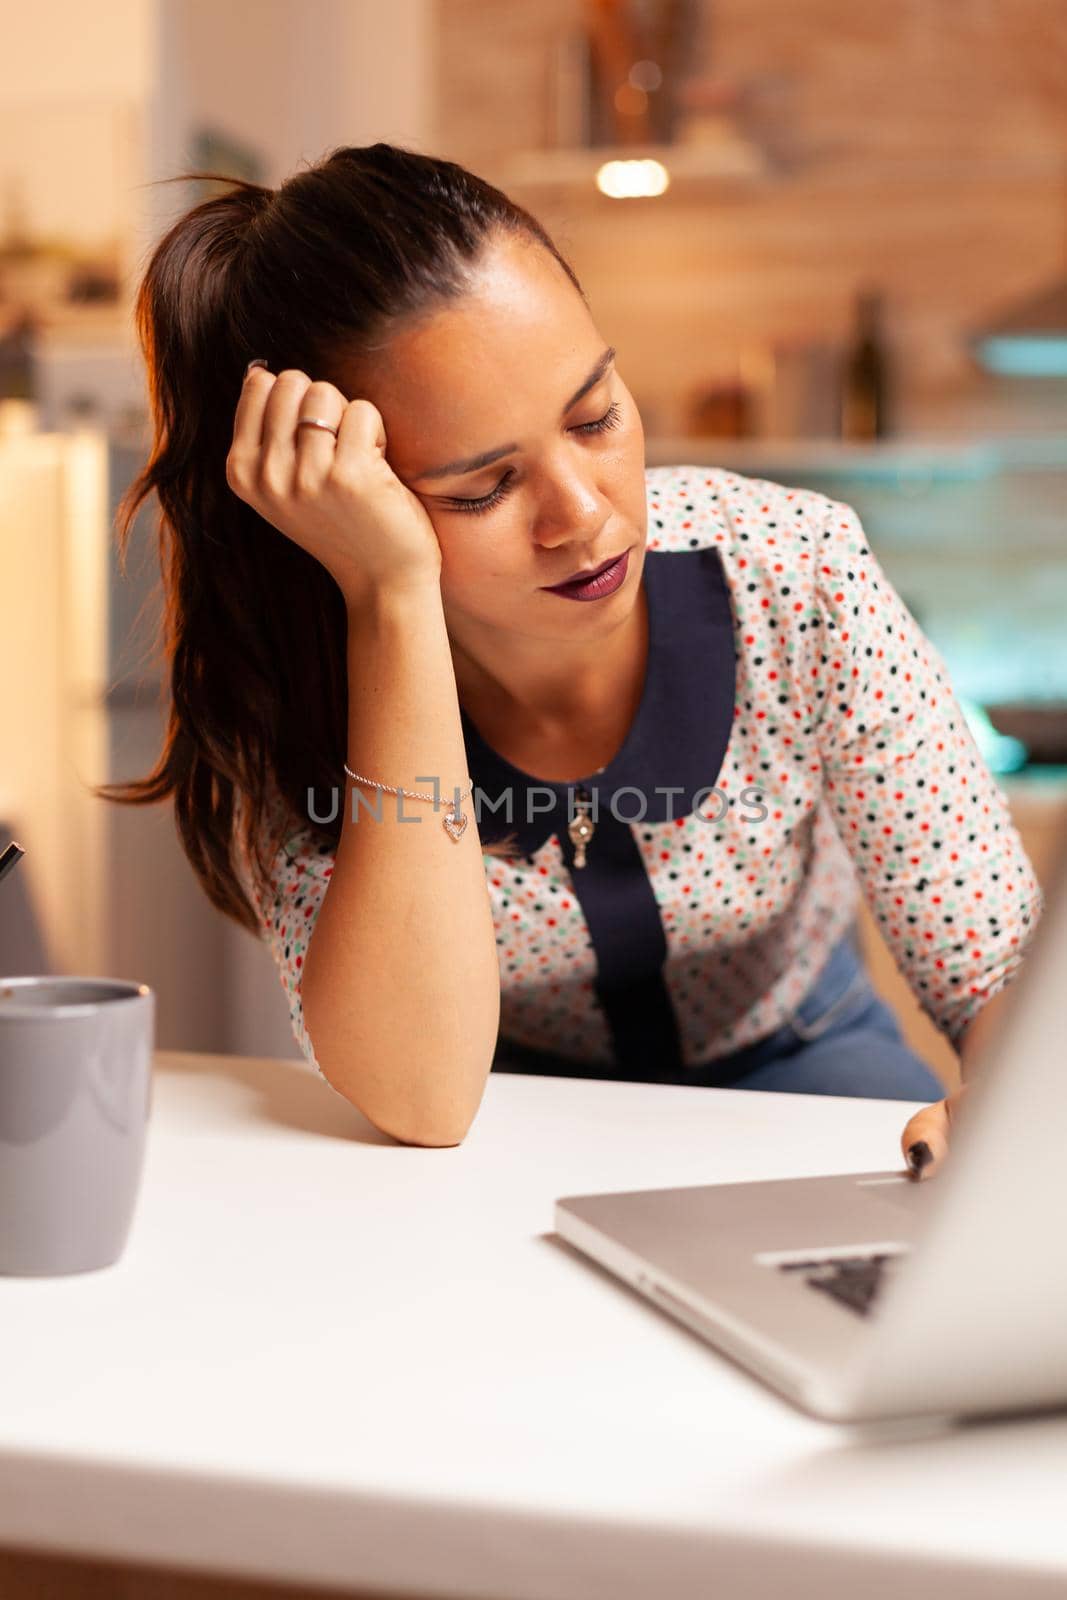 Woman keeping eyes closed because of exhaustion while working on a project for work late at night. Employee using modern technology at midnight doing overtime for job, business, busy, career, network.